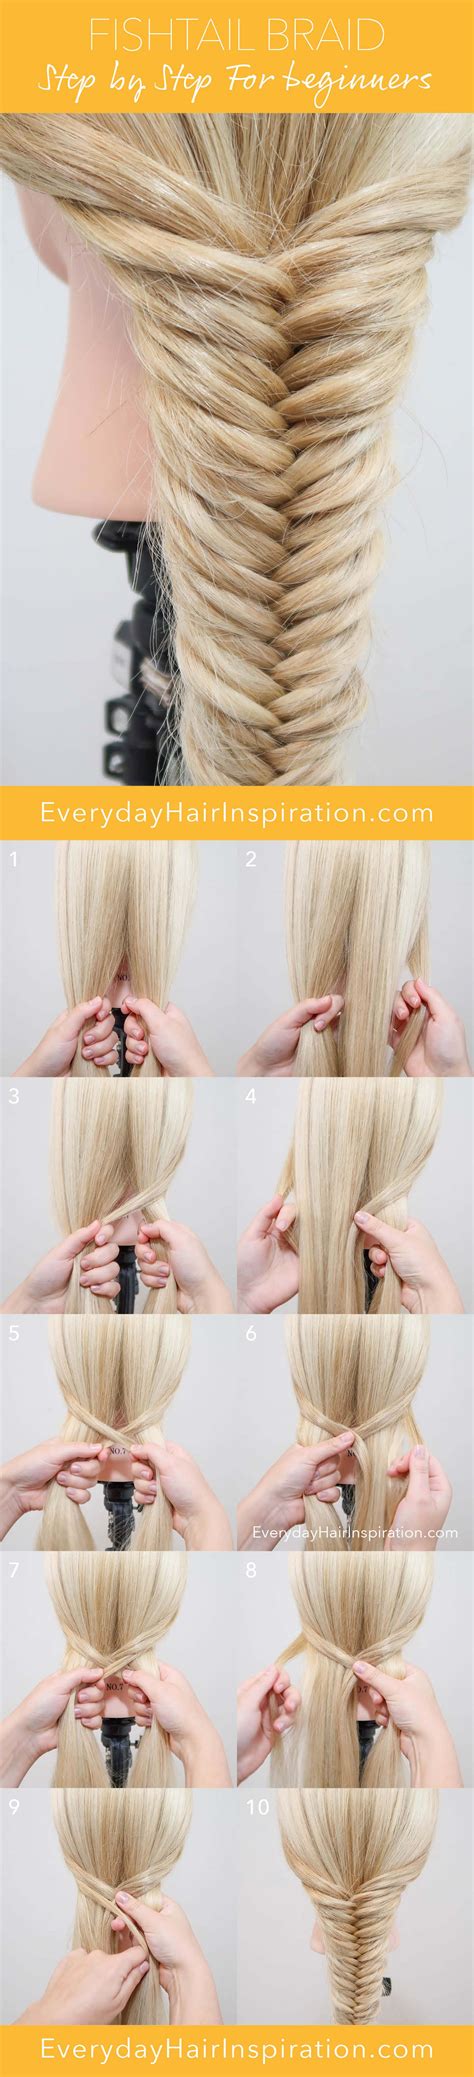 Free How To Fishtail Braid Your Own Hair Step By Step With Pictures Hairstyles Inspiration